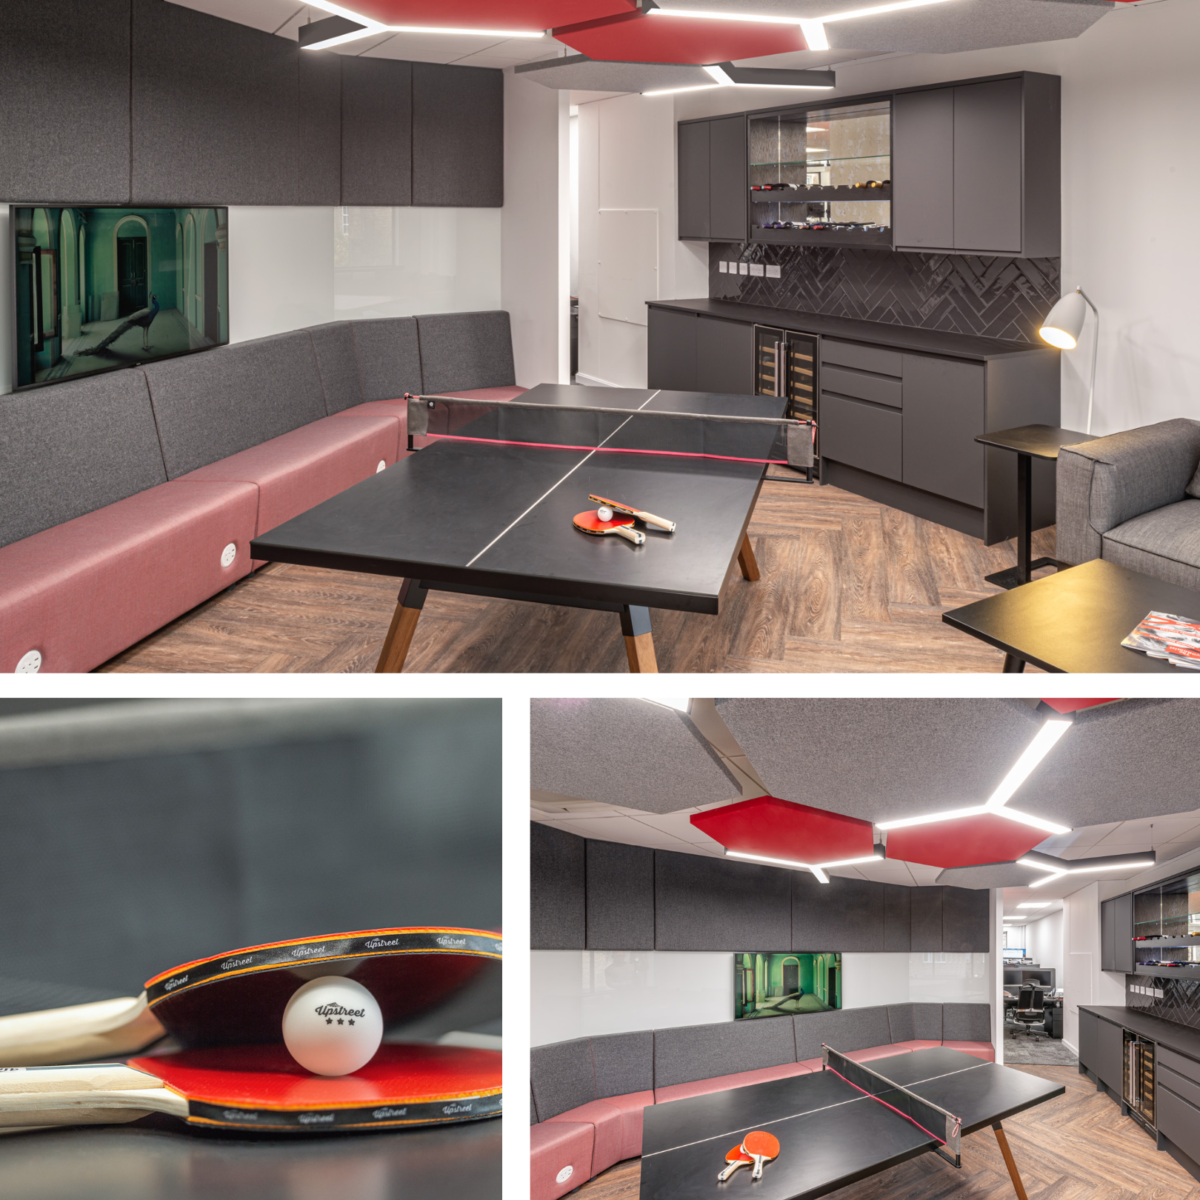 Image grid showing table tennis table in office design as a social destination